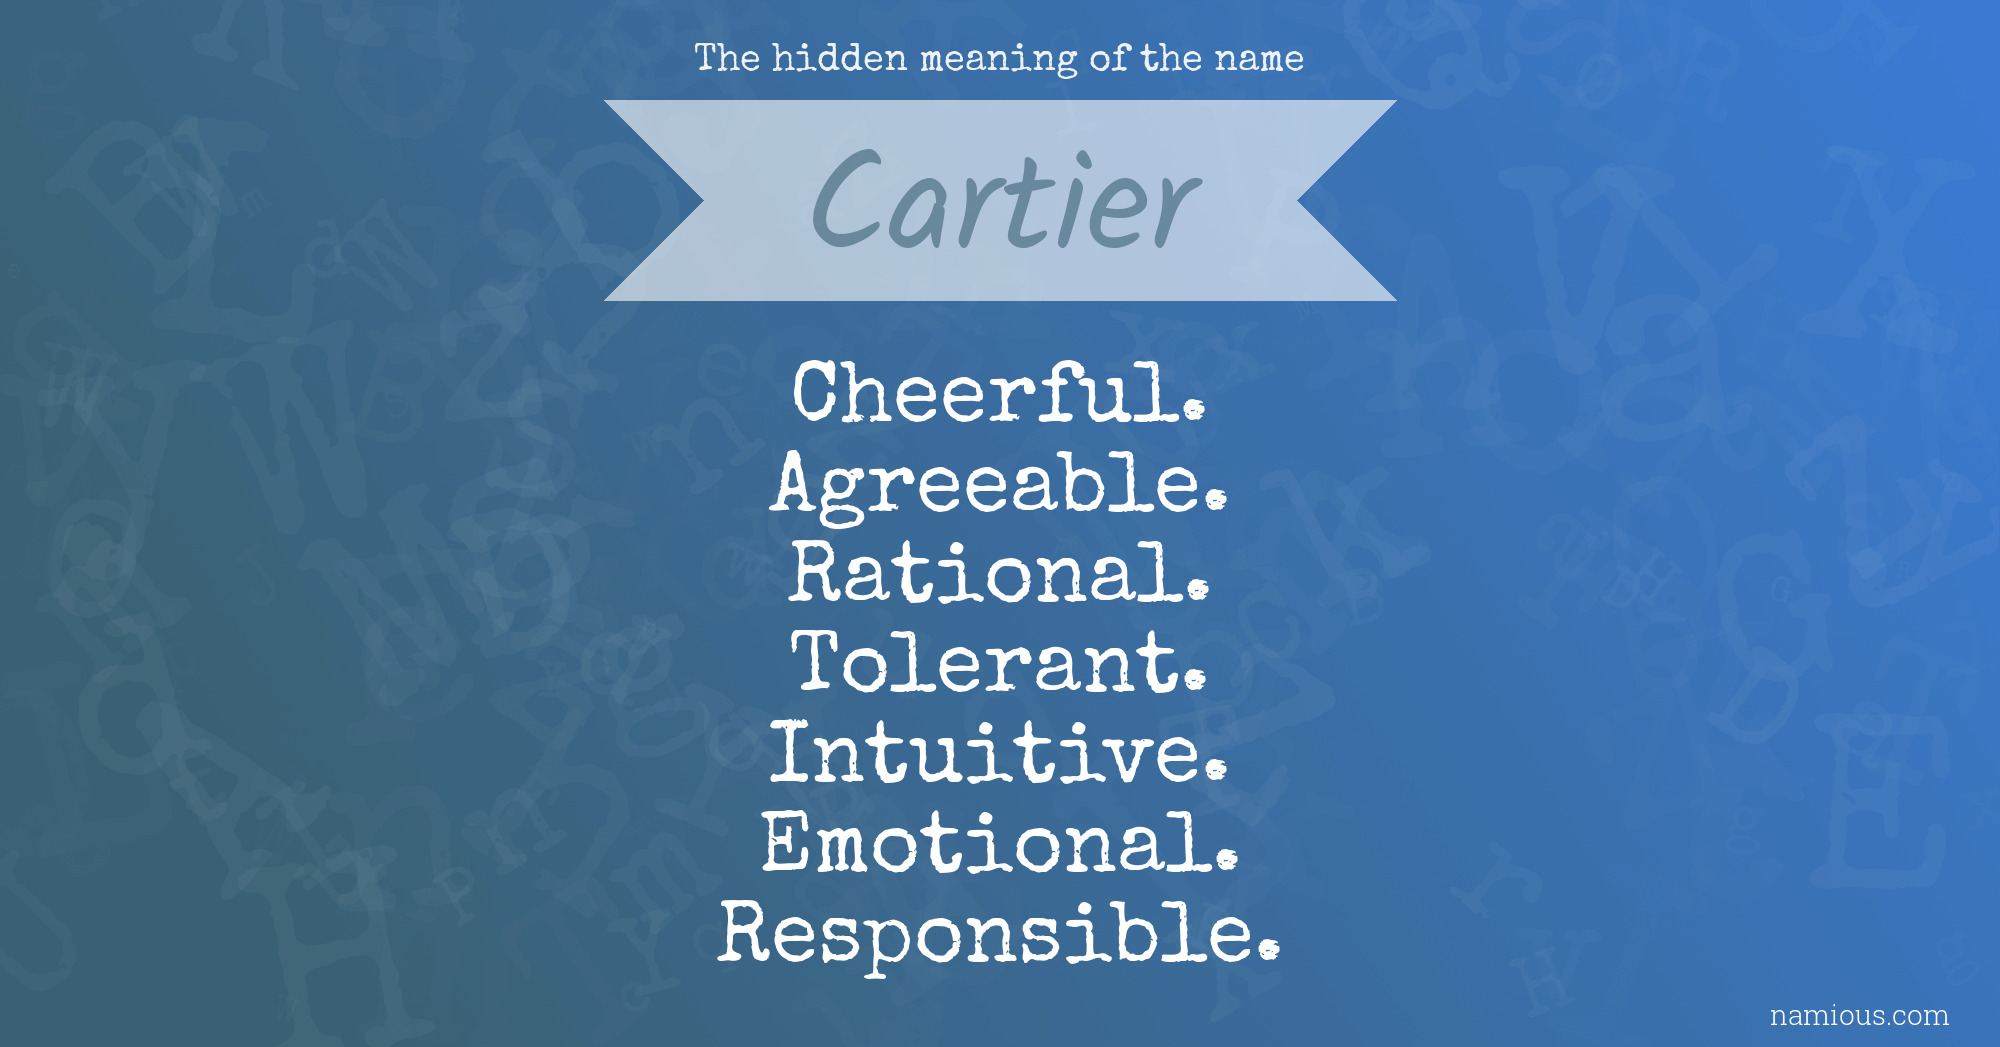 cartier meaning